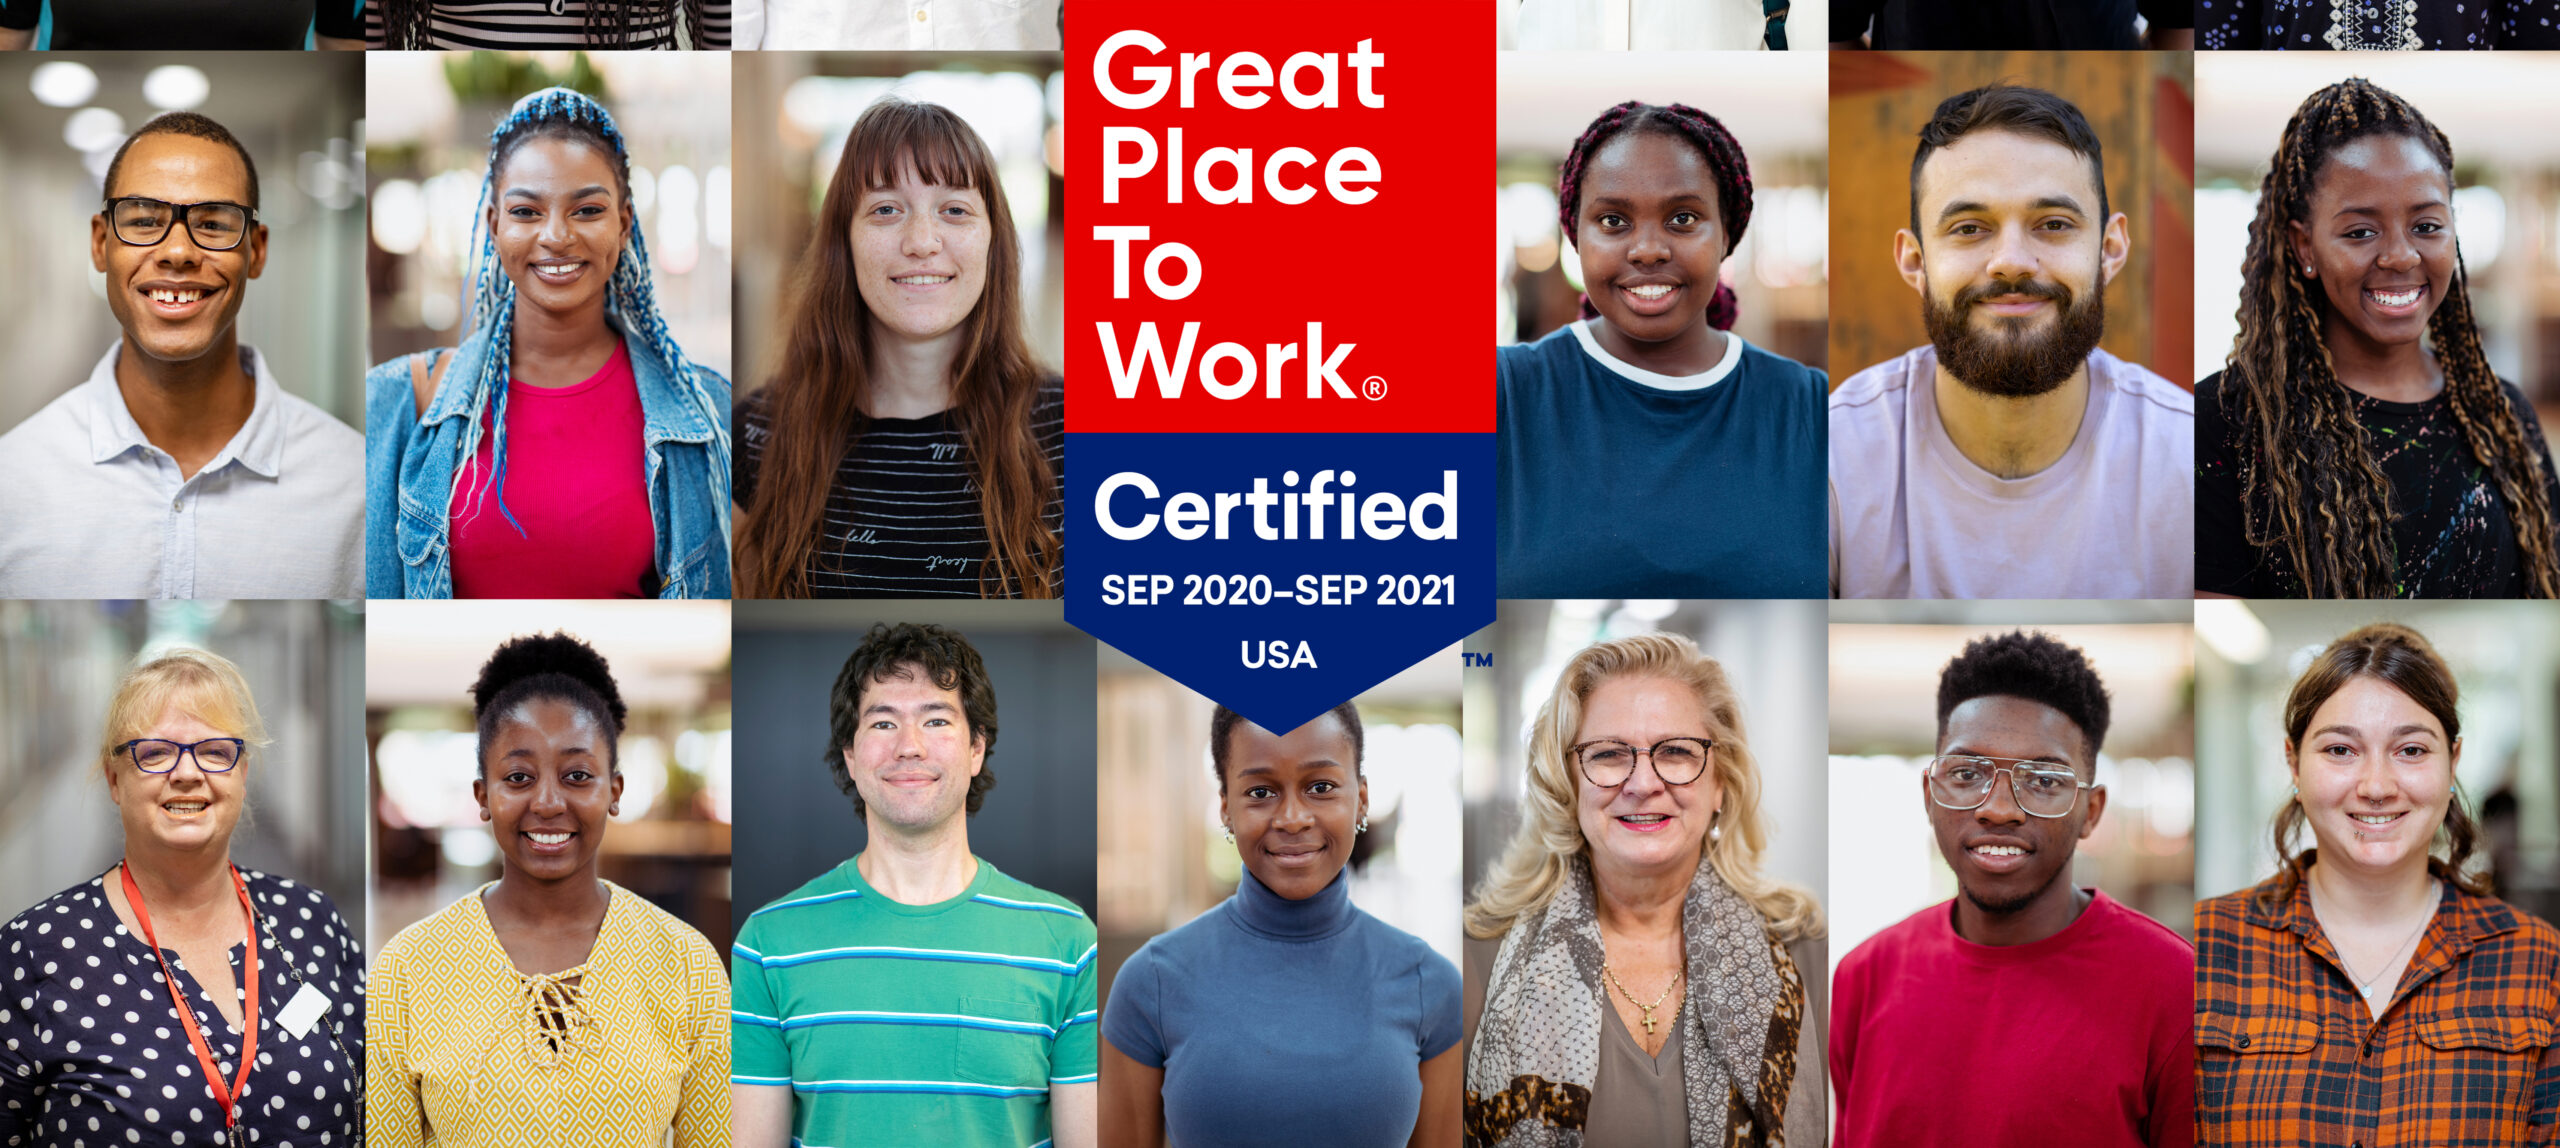 Canopy is Recognized as a Certified Great Place to Work